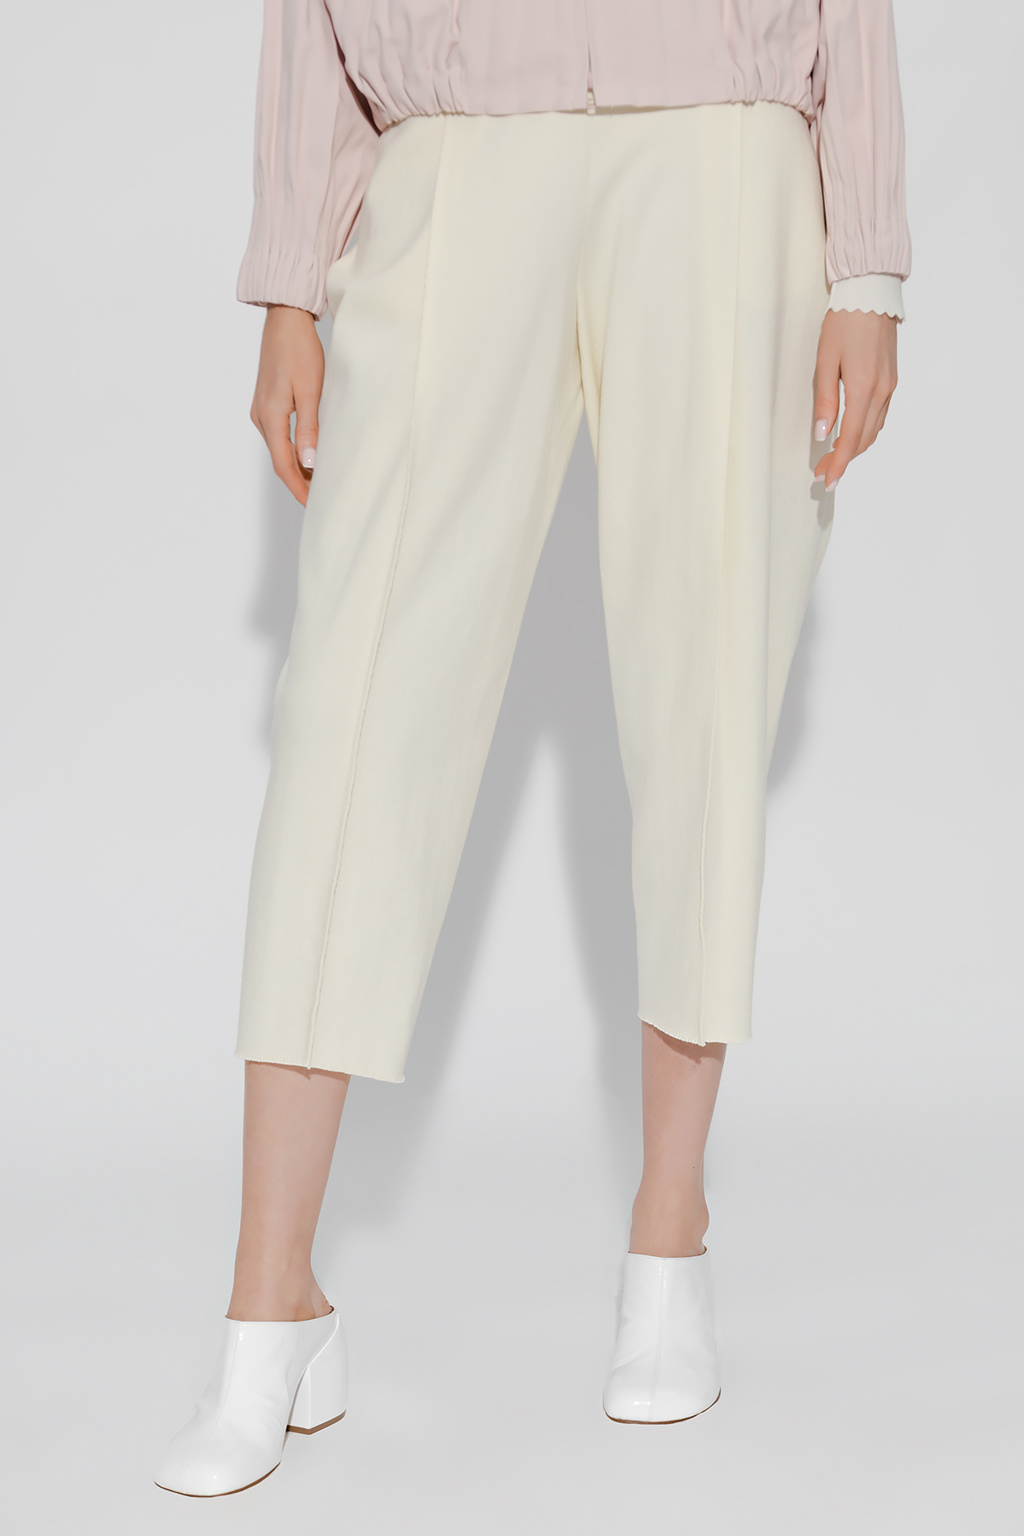 Issey Miyake Camela trousers with stitching details